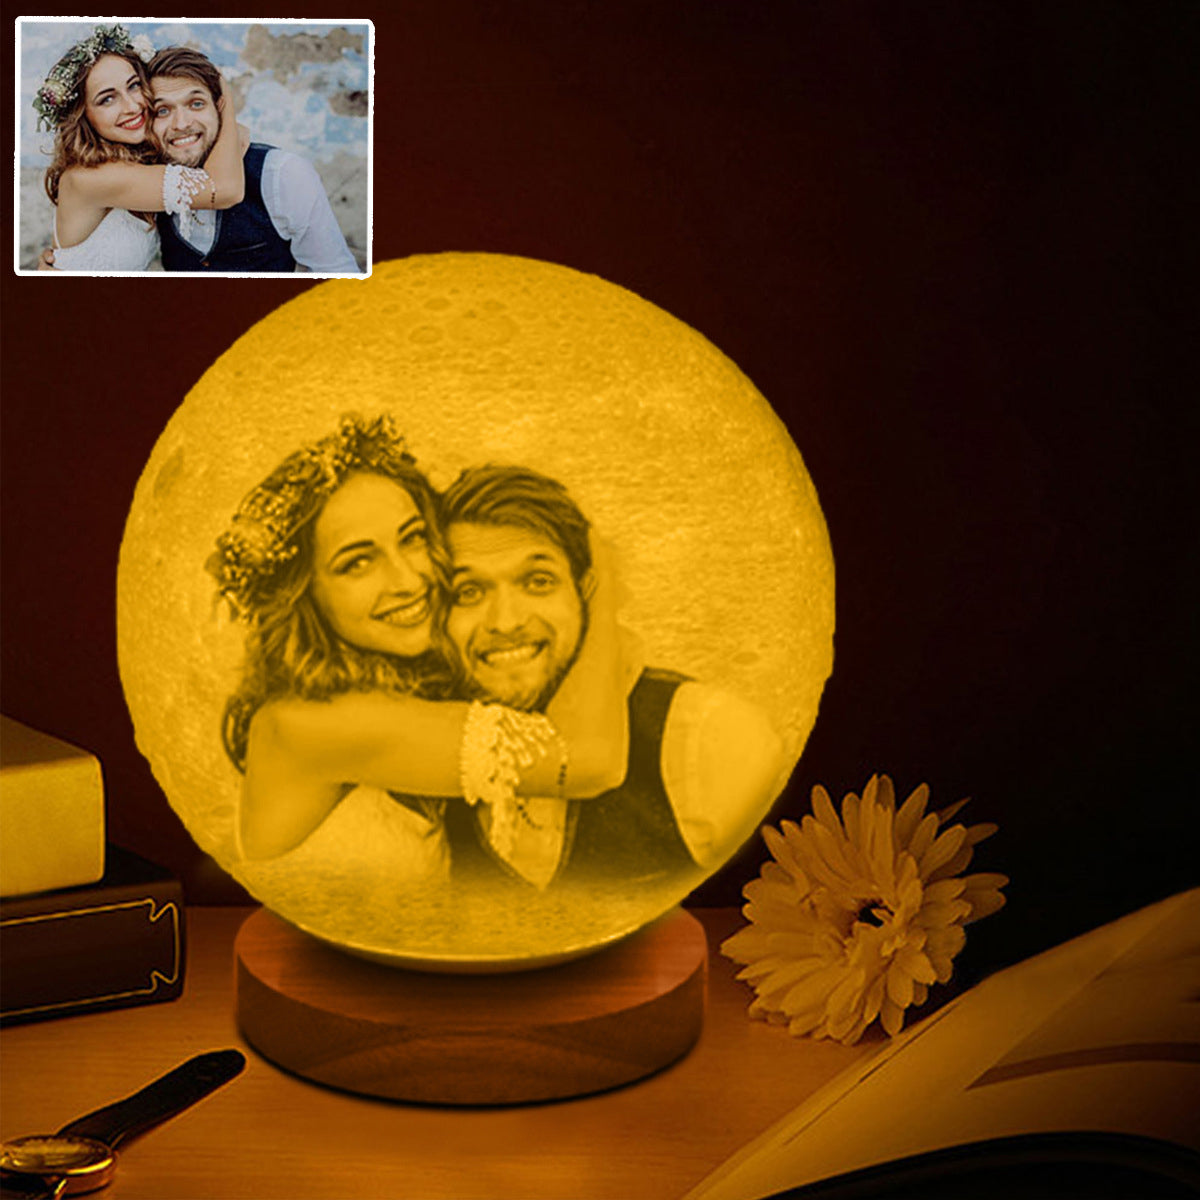 3D Printing 16 Colors Remote Control LED Moon Lamp